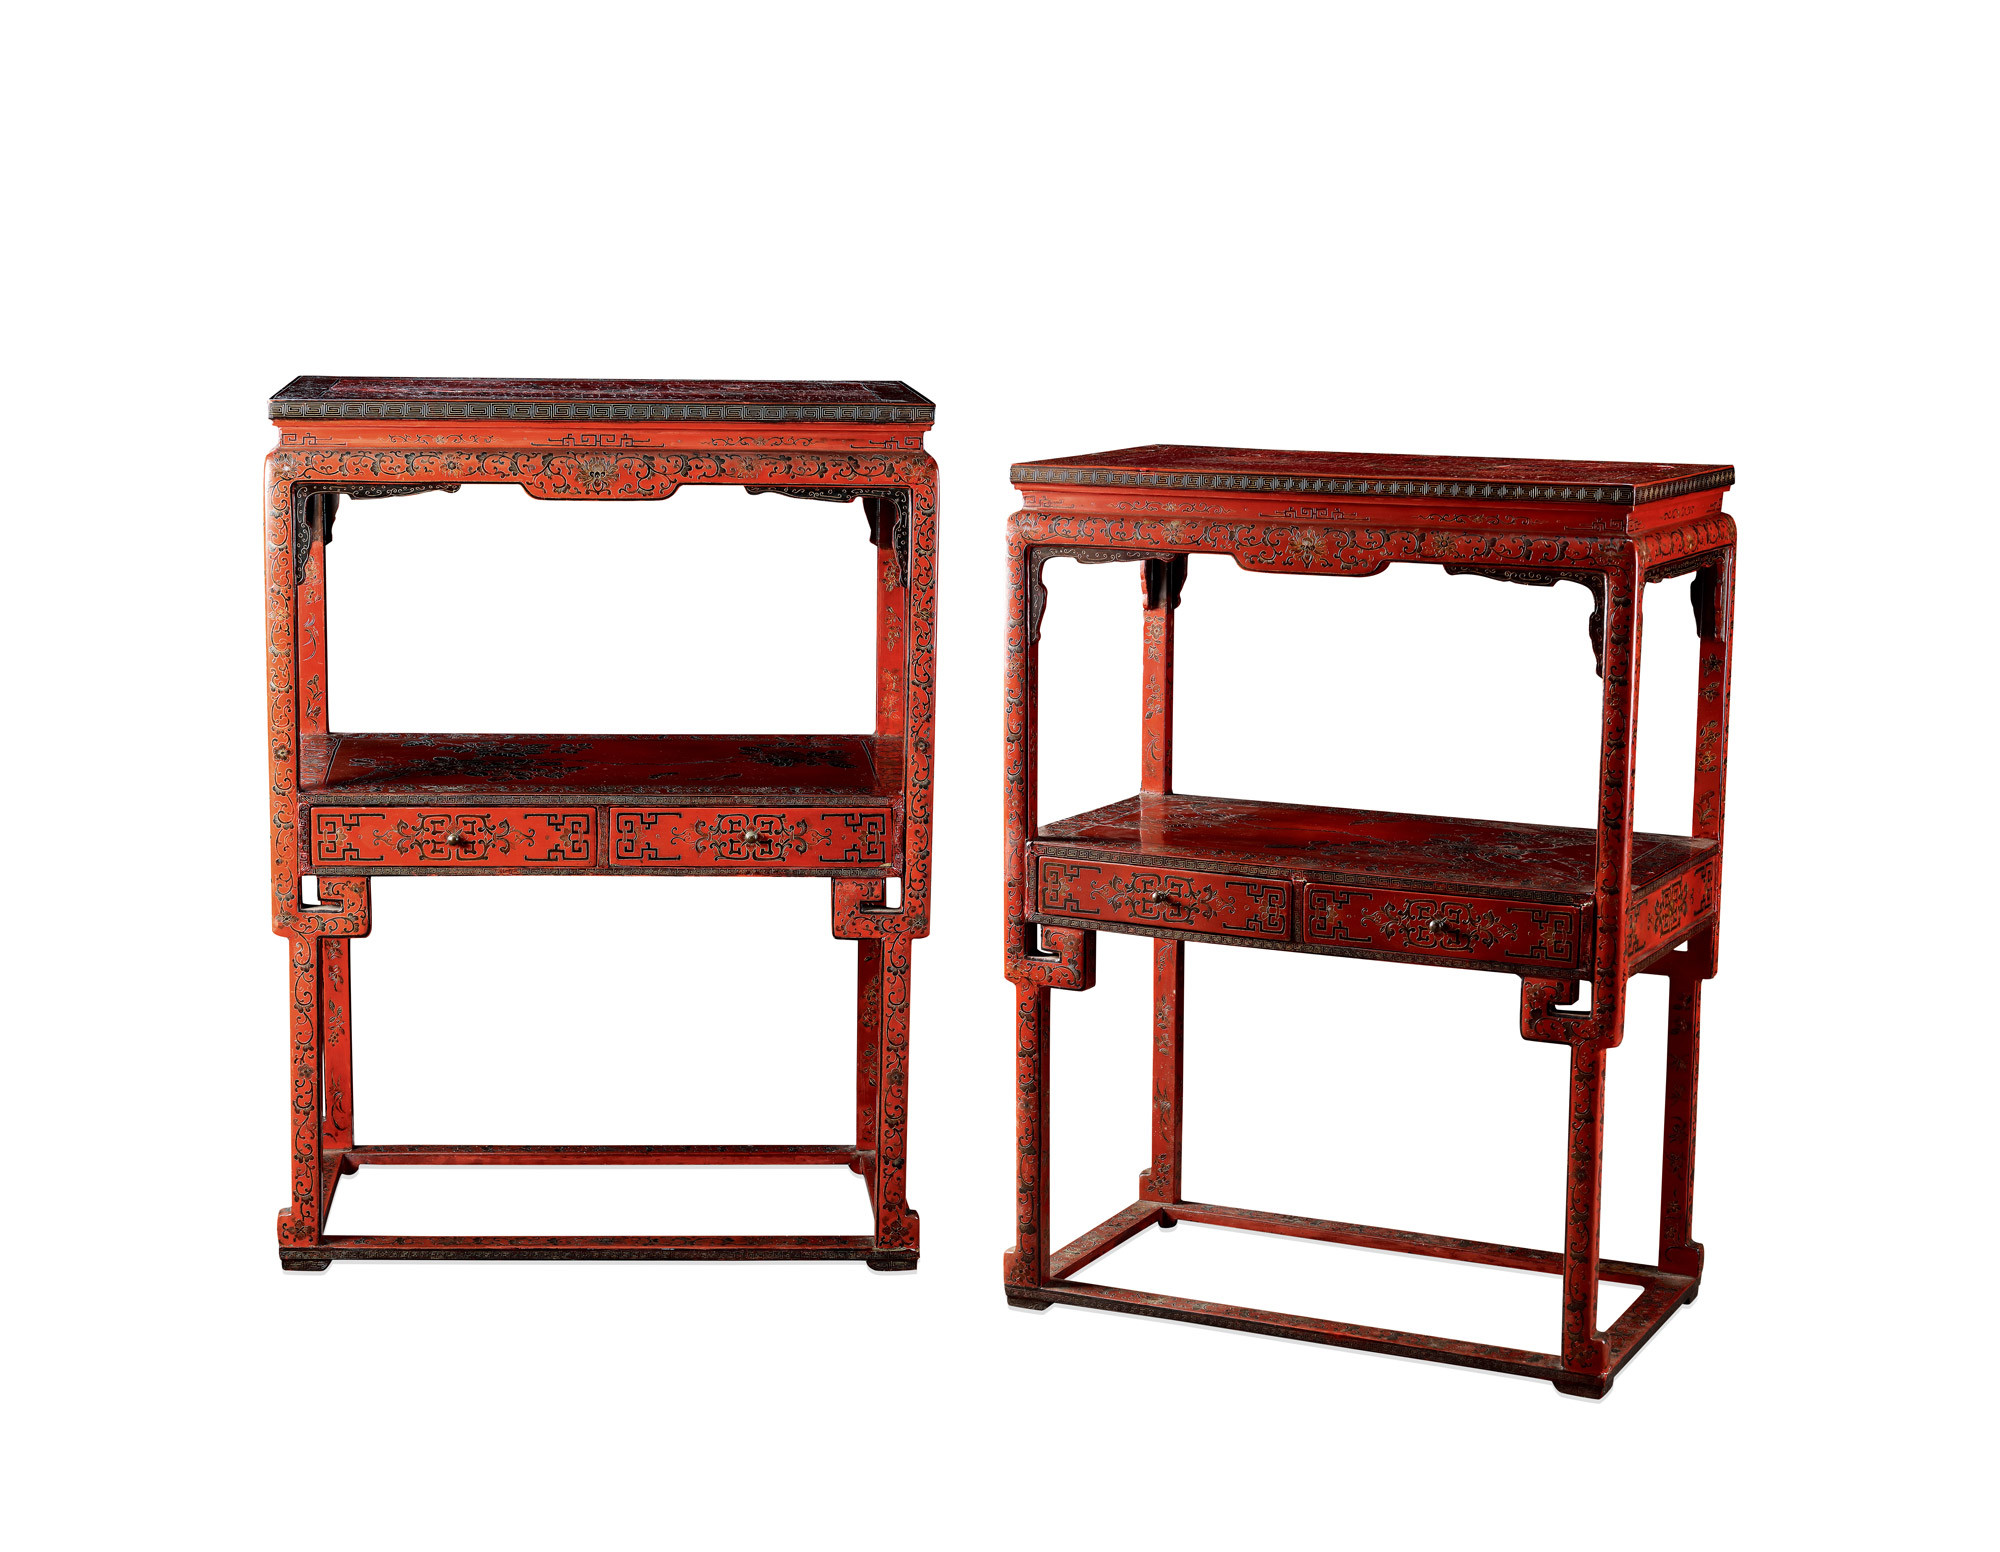 A PAIR OF RED LACQUERED CARVED‘FLORAL’ RECTANGULAR TABLES